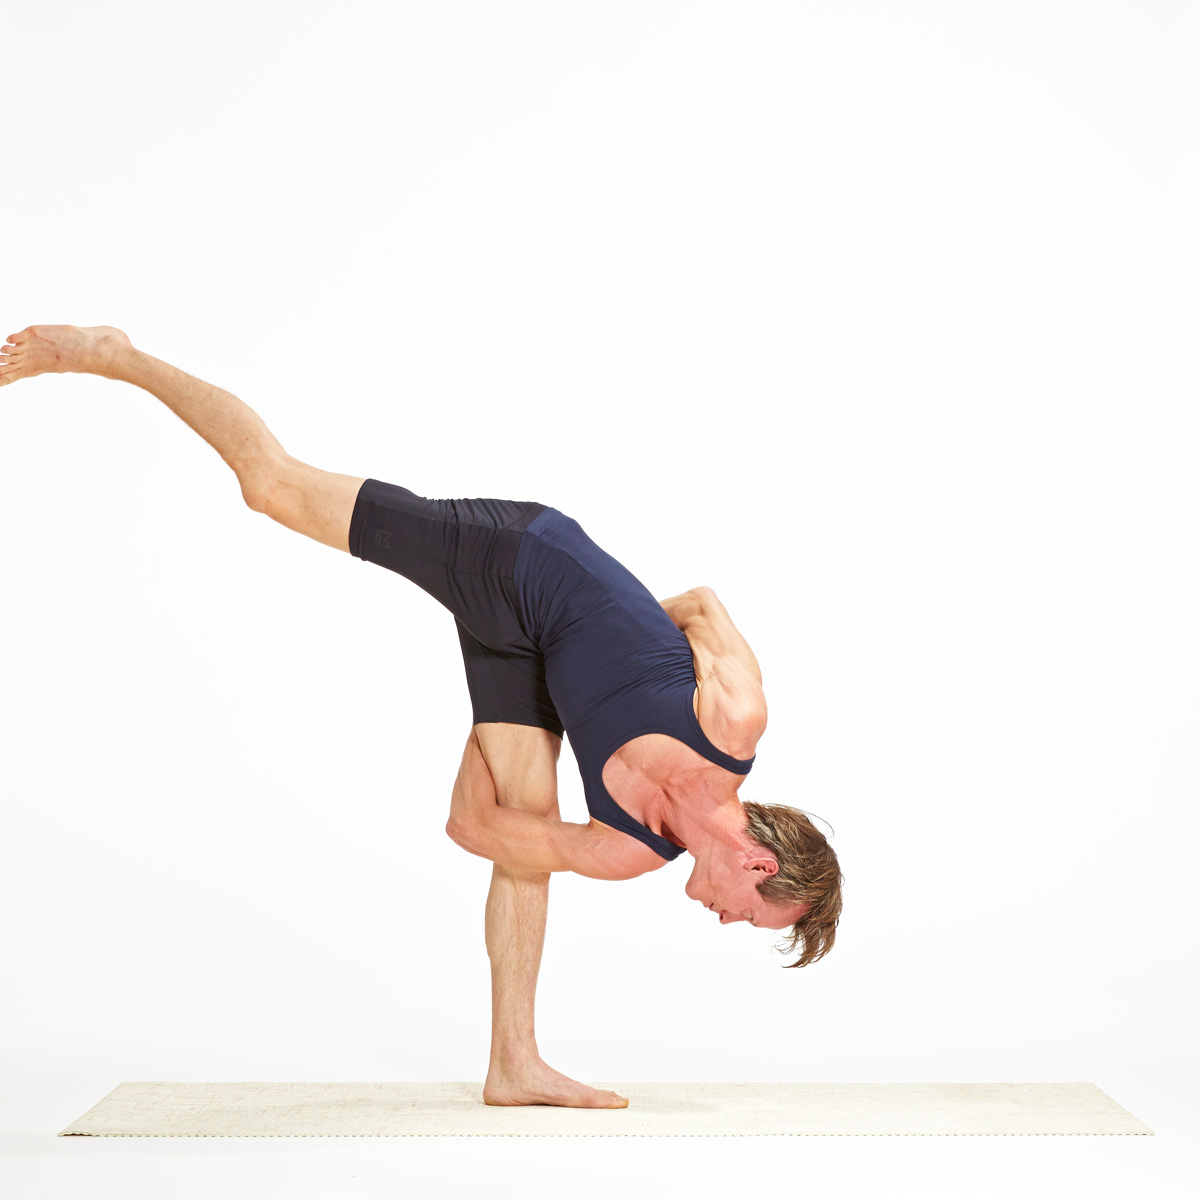 Our step by step guide to Ardha Chandrasana (half moon pose)